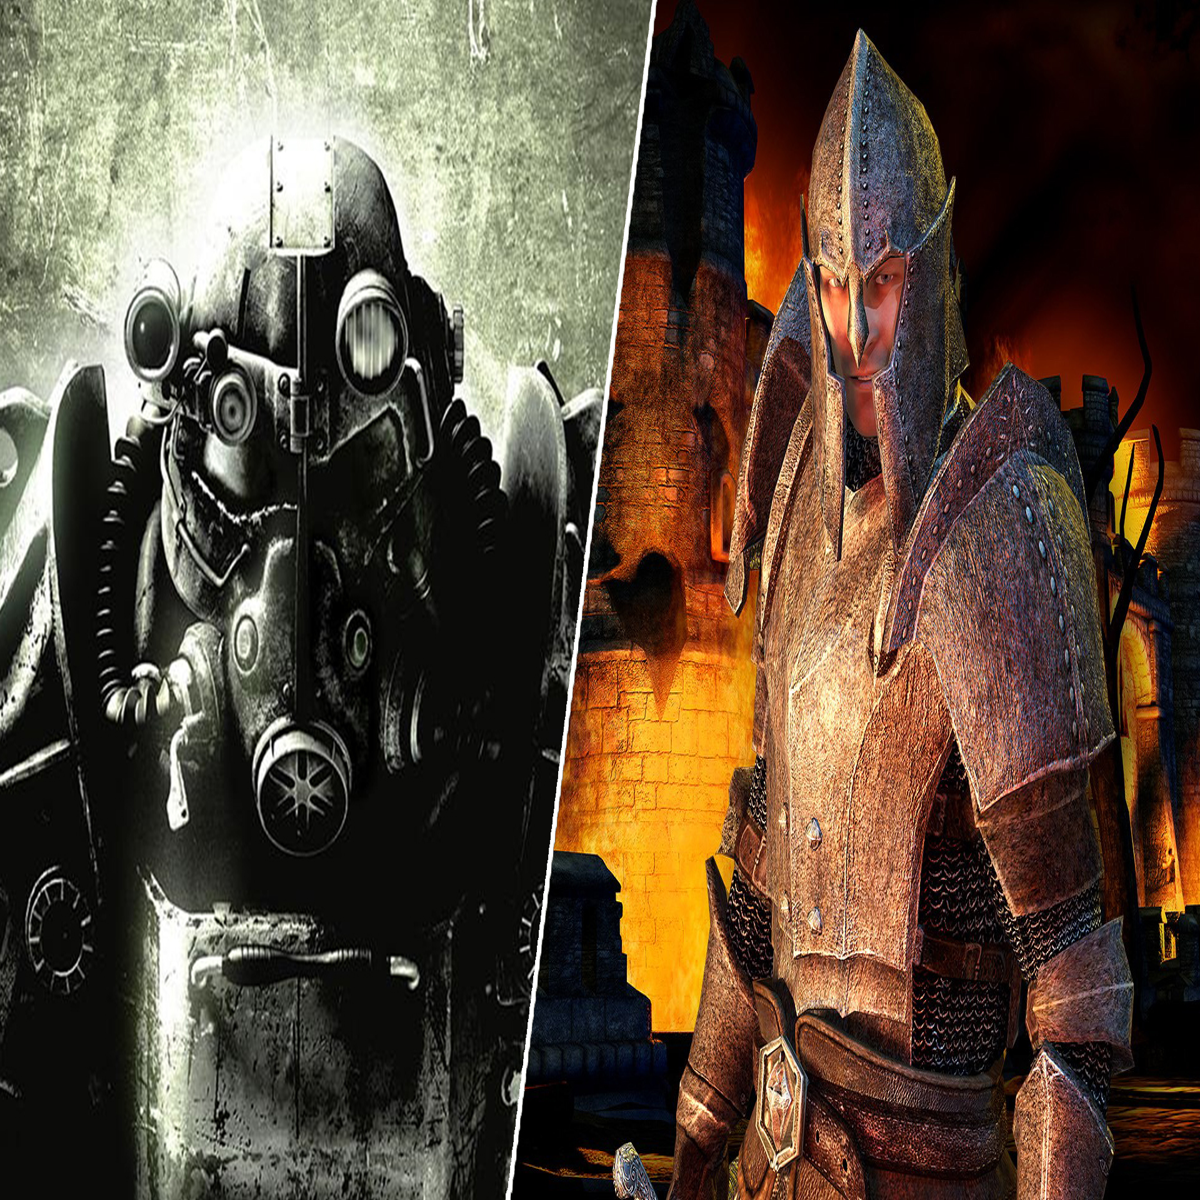 Fallout 3, Oblivion Remasters Will Be Xbox Exclusive Releases - Rumor